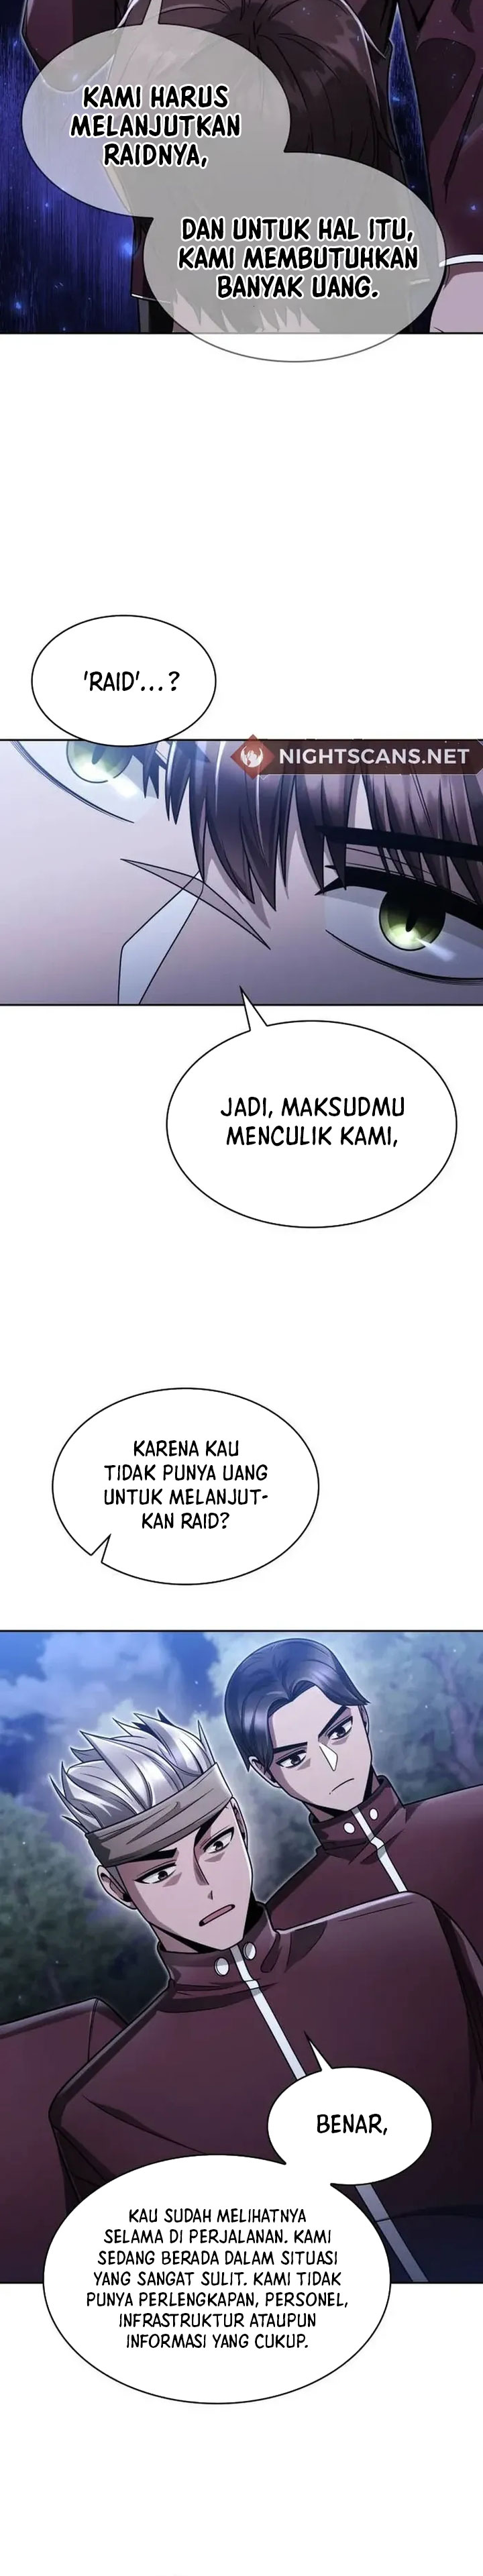 Dilarang COPAS - situs resmi www.mangacanblog.com - Komik clever cleaning life of the returned genius hunter 058 - chapter 58 59 Indonesia clever cleaning life of the returned genius hunter 058 - chapter 58 Terbaru 24|Baca Manga Komik Indonesia|Mangacan